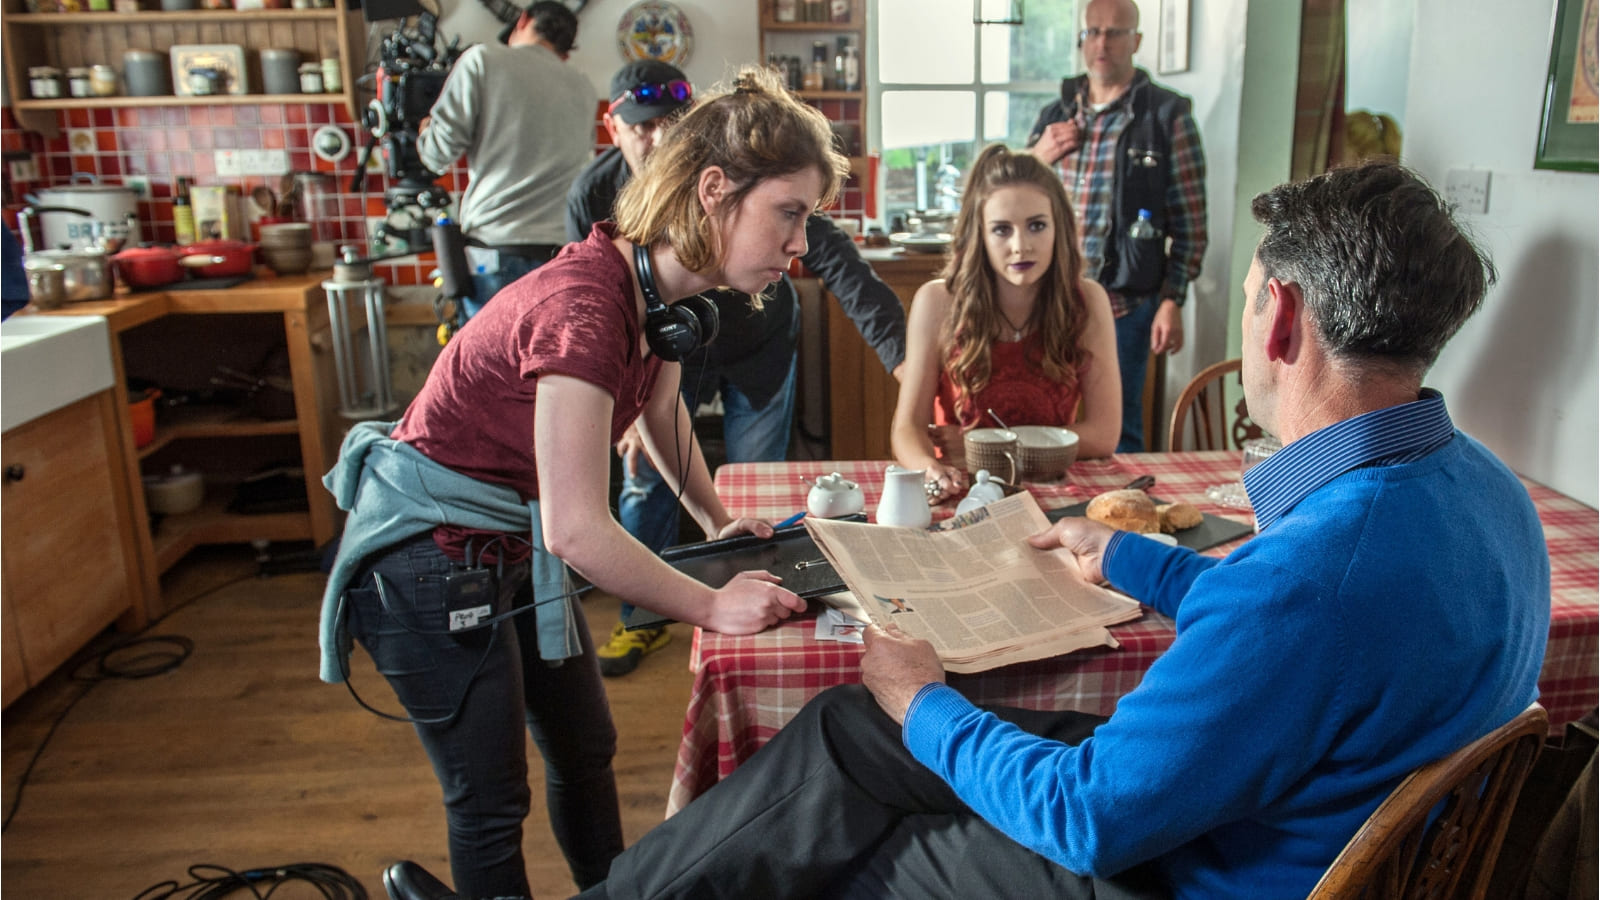 On the set of TV Show, Bannan, people stand around a table in a scene set in a kitchen